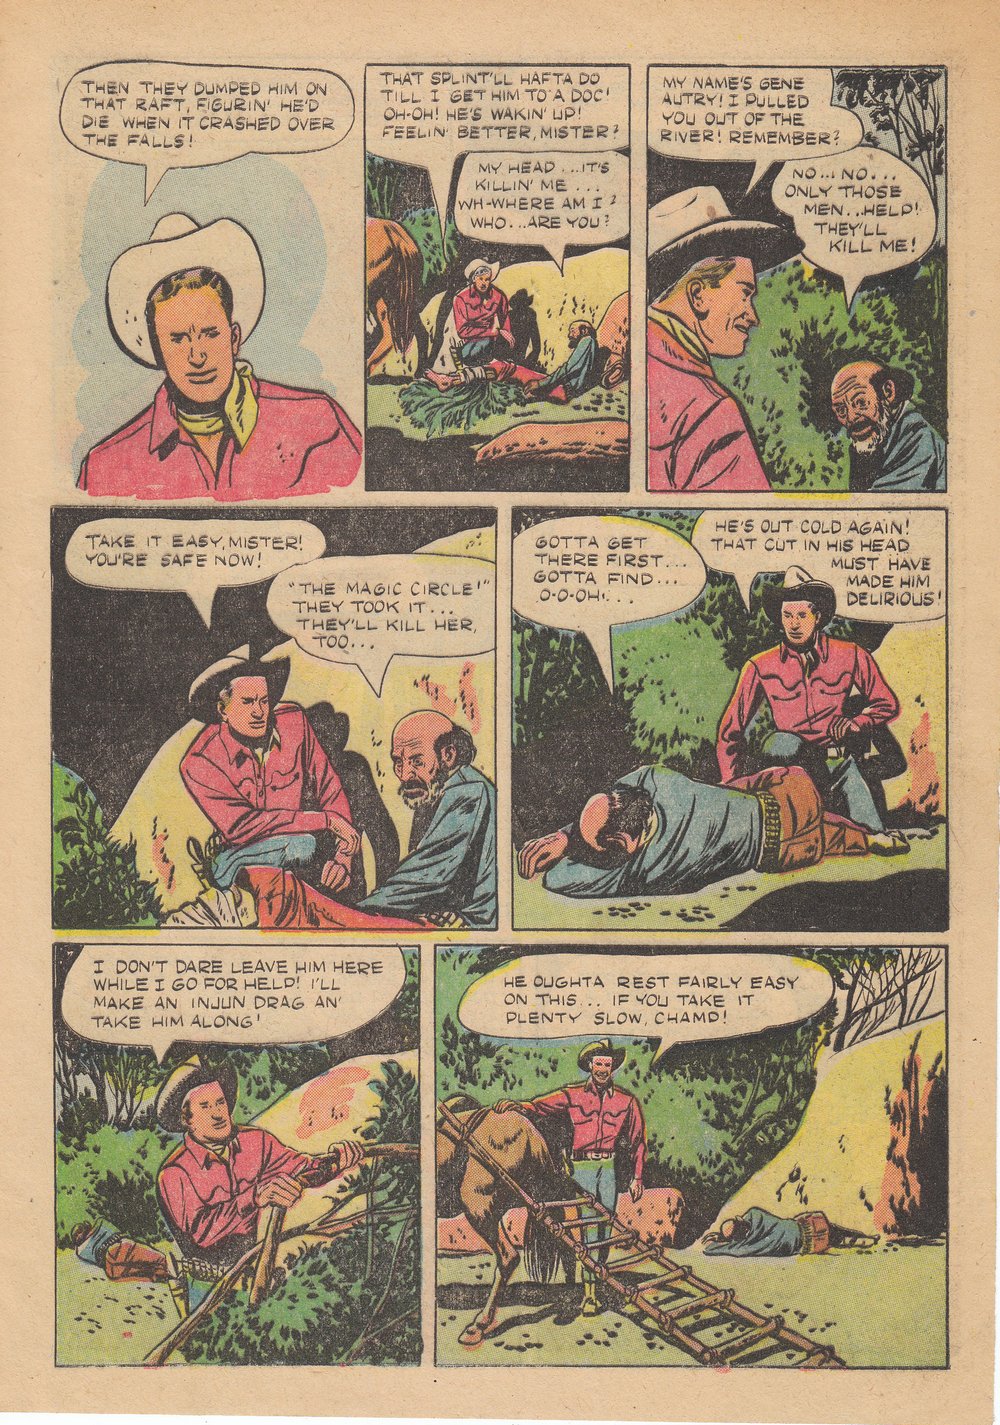 Gene Autry Comics (1946) issue 17 - Page 9